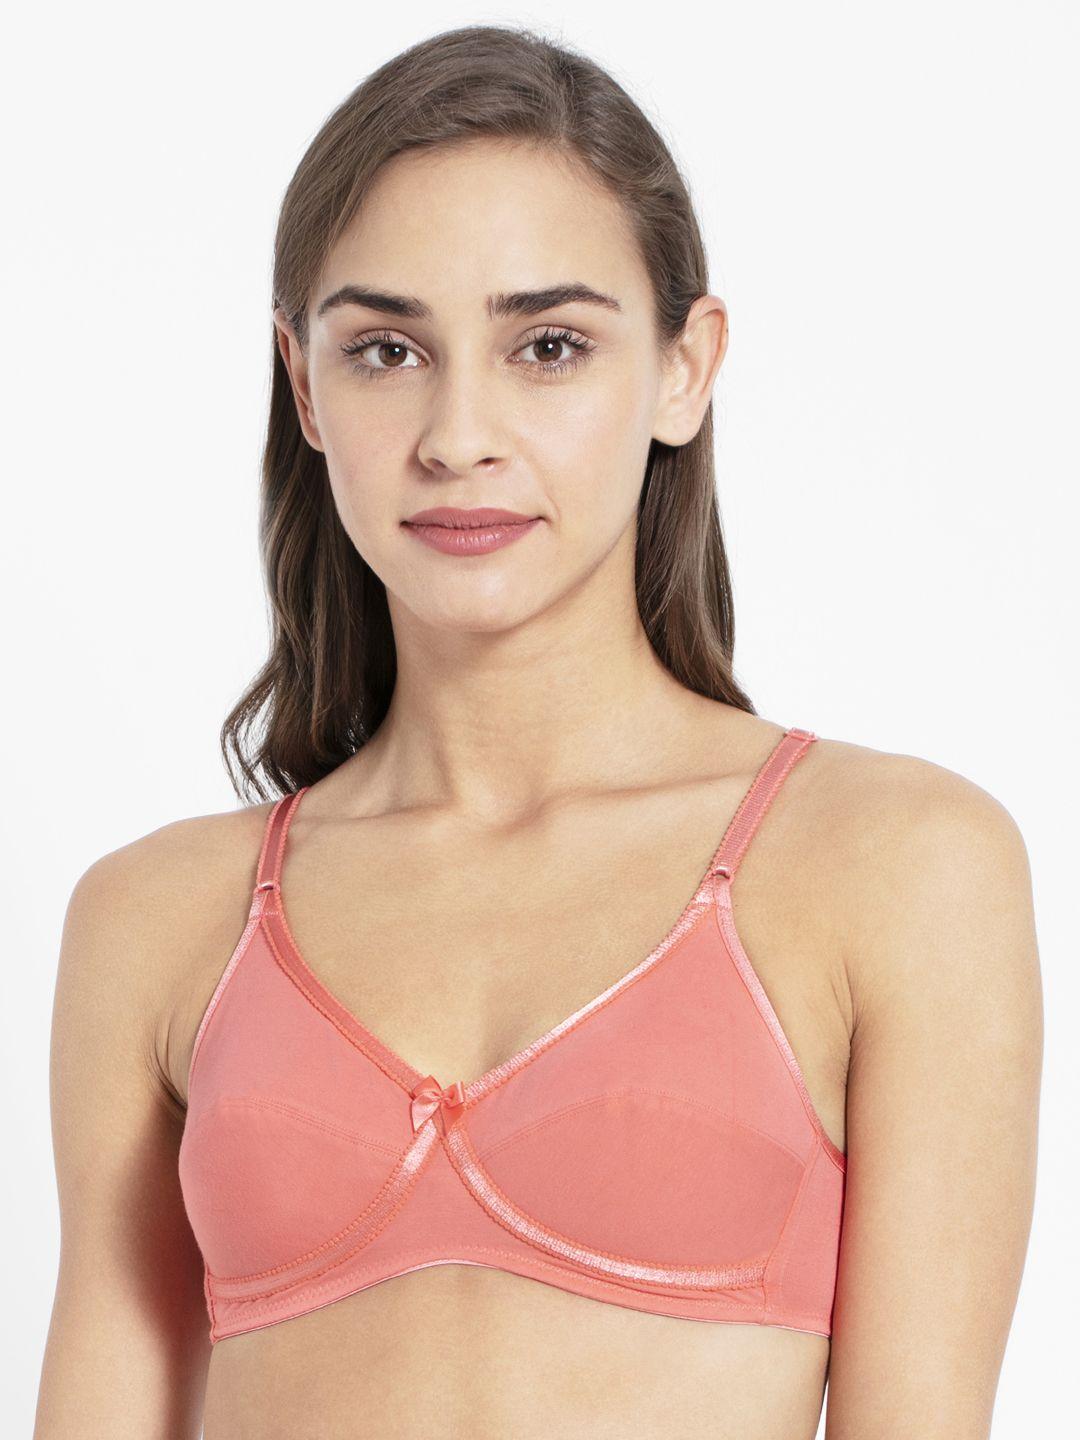 jockey-pink-solid-non-wired-non-padded-t-shirt-bra-1242-0105-blpnk